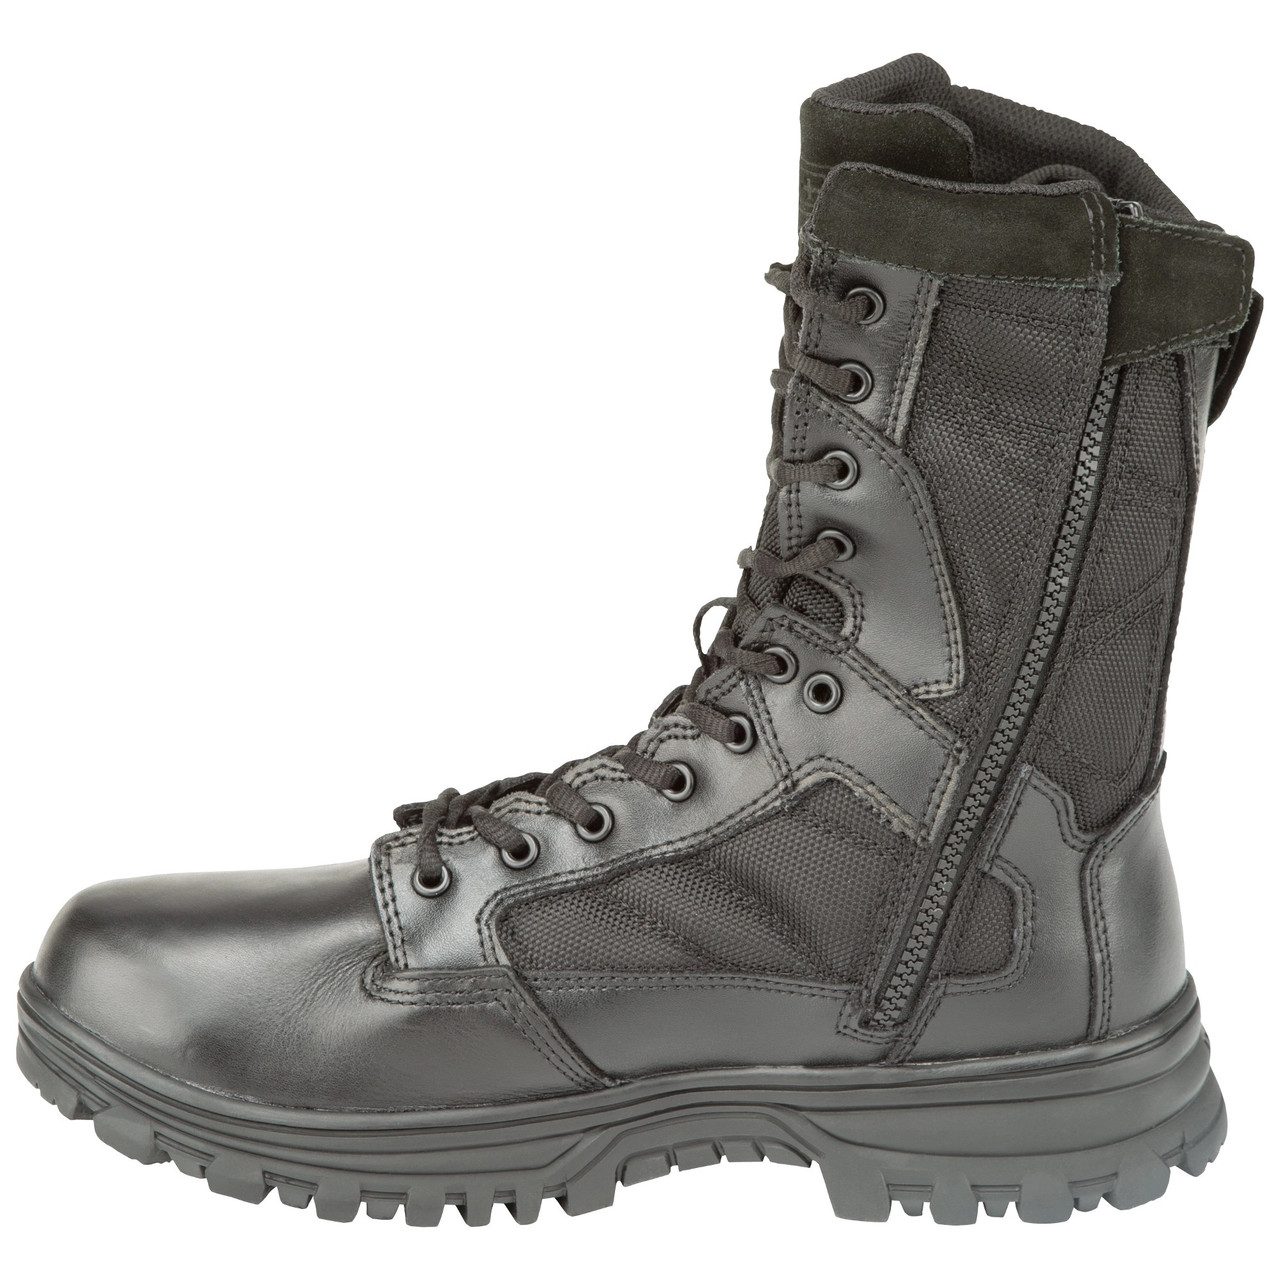 5.11 Tactical Women's A.T.A.C. 2.0 8 Boot with Side Zip Black